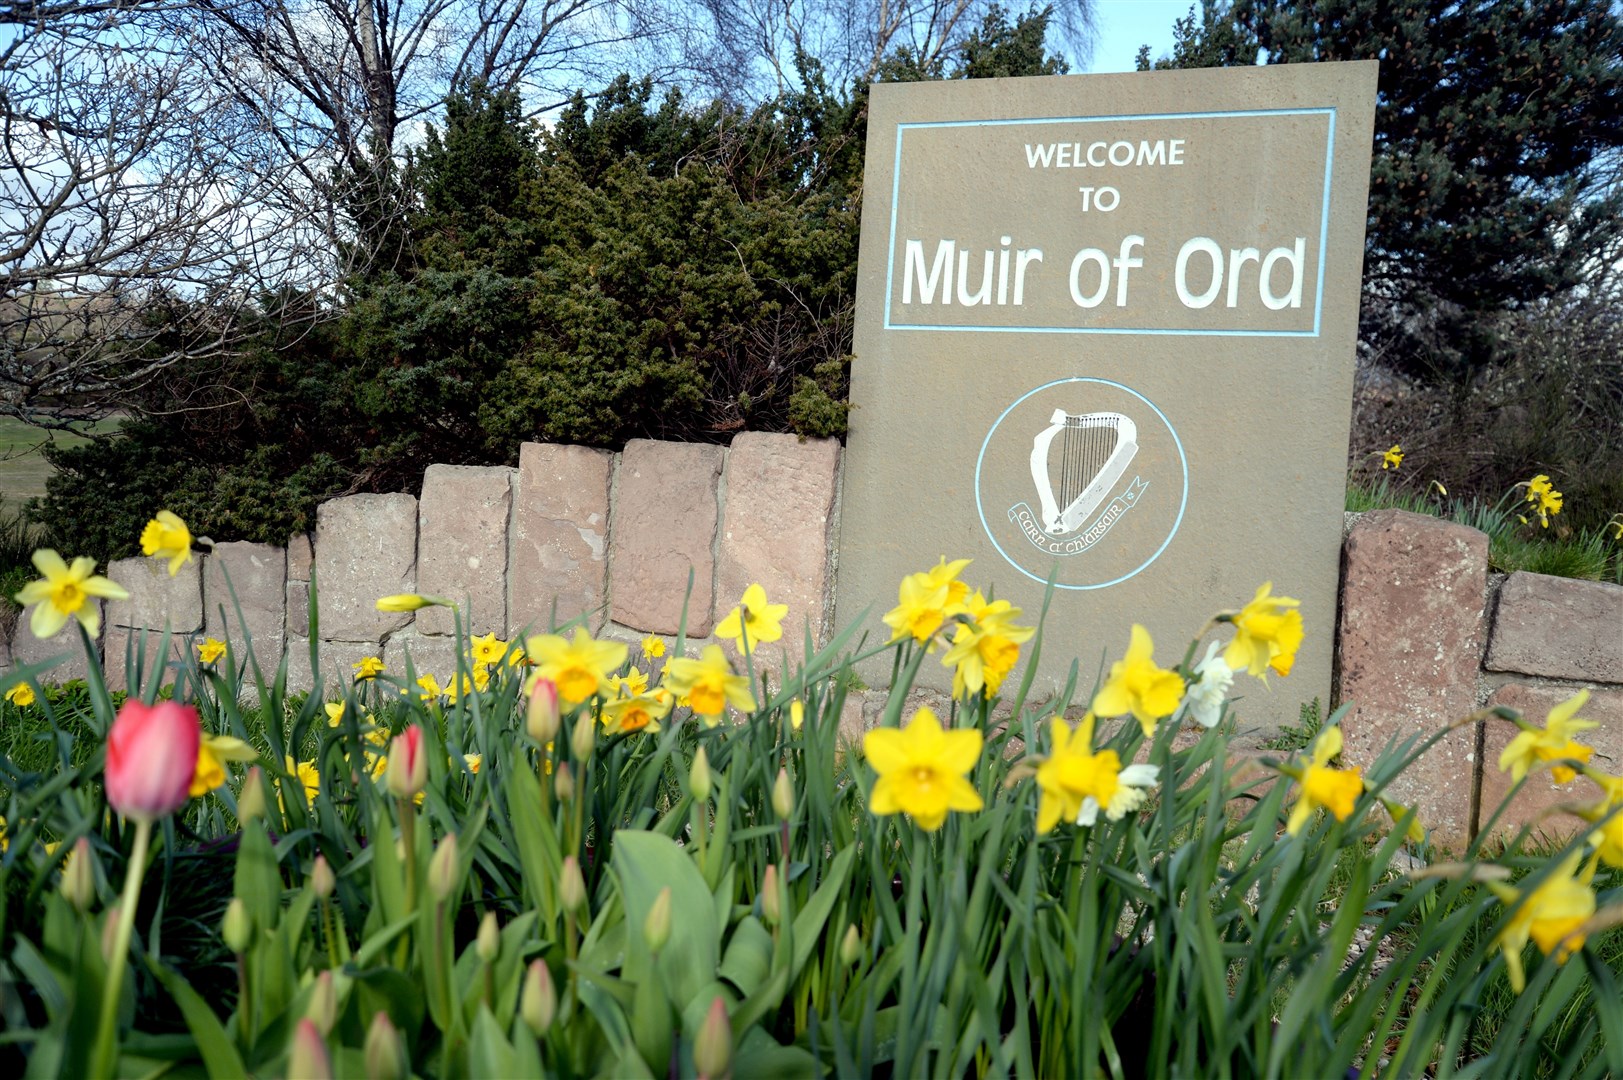 Muir of Ord has witnessed significant home-building in recent years.